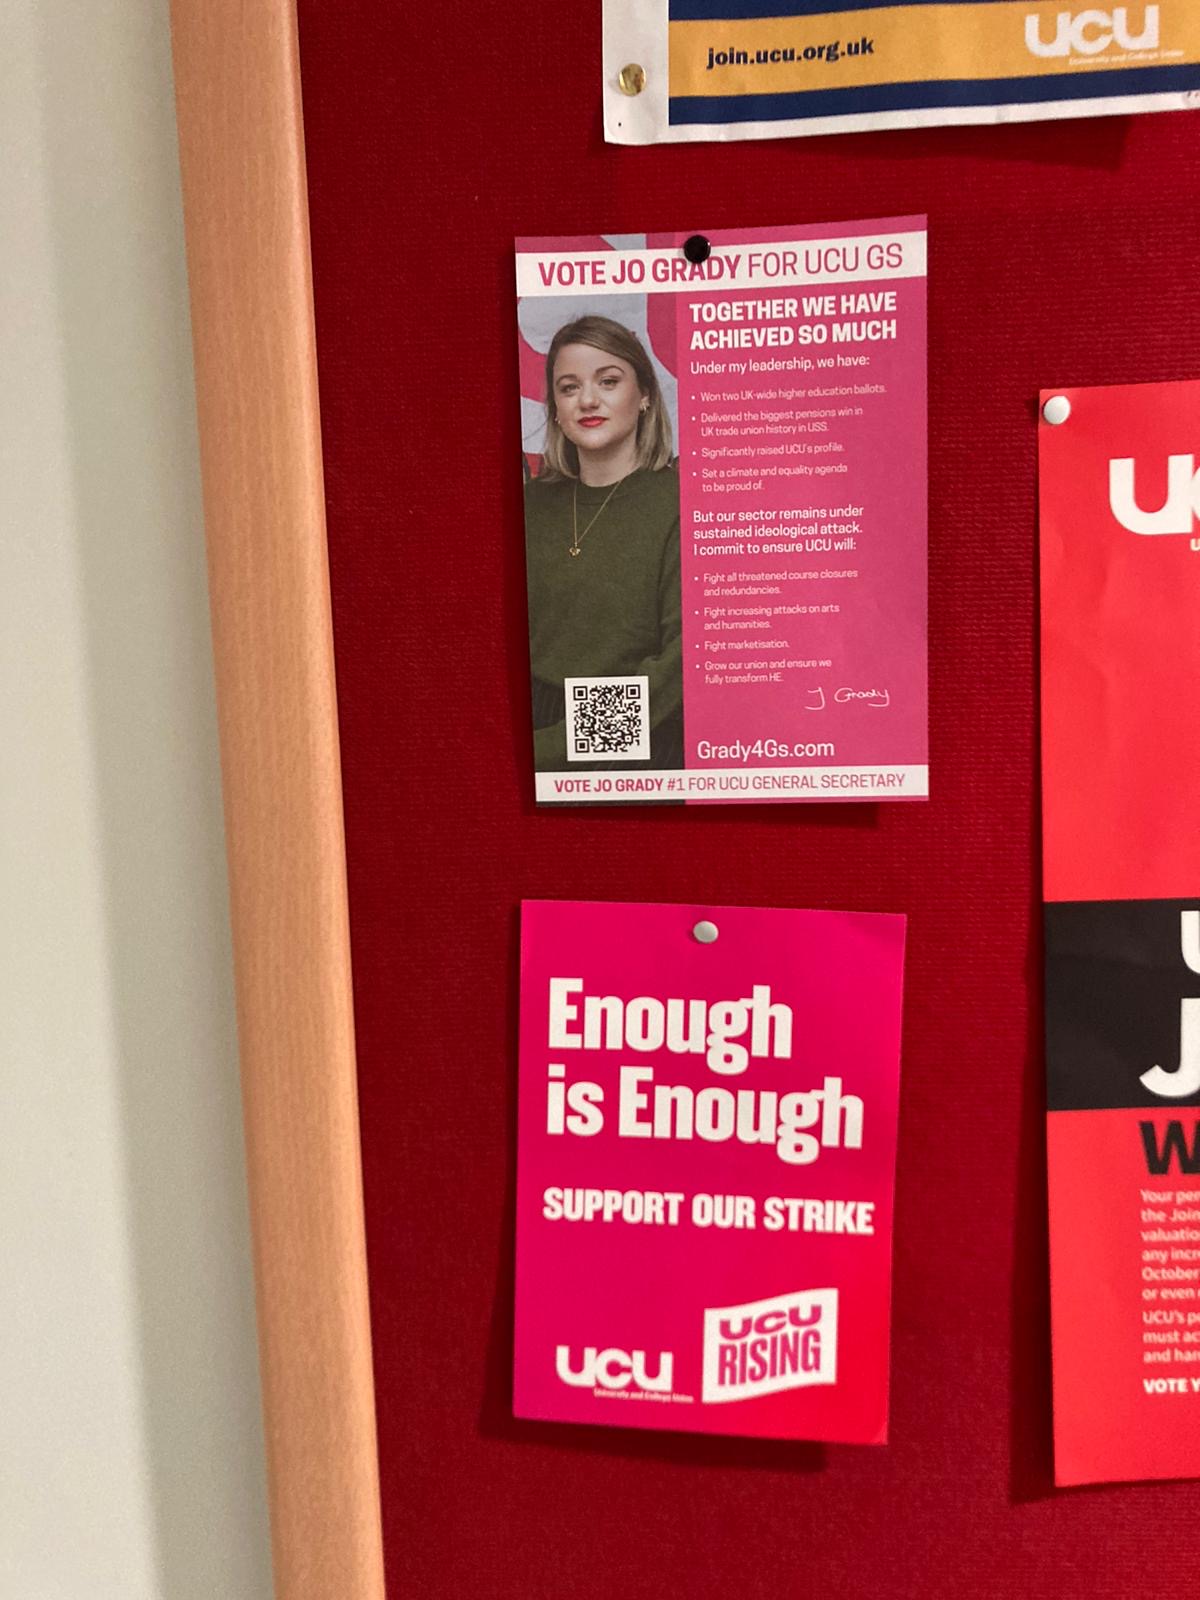 Grady4GS poster on a notice board above a UCU ‘Enough is Enough’ poster.